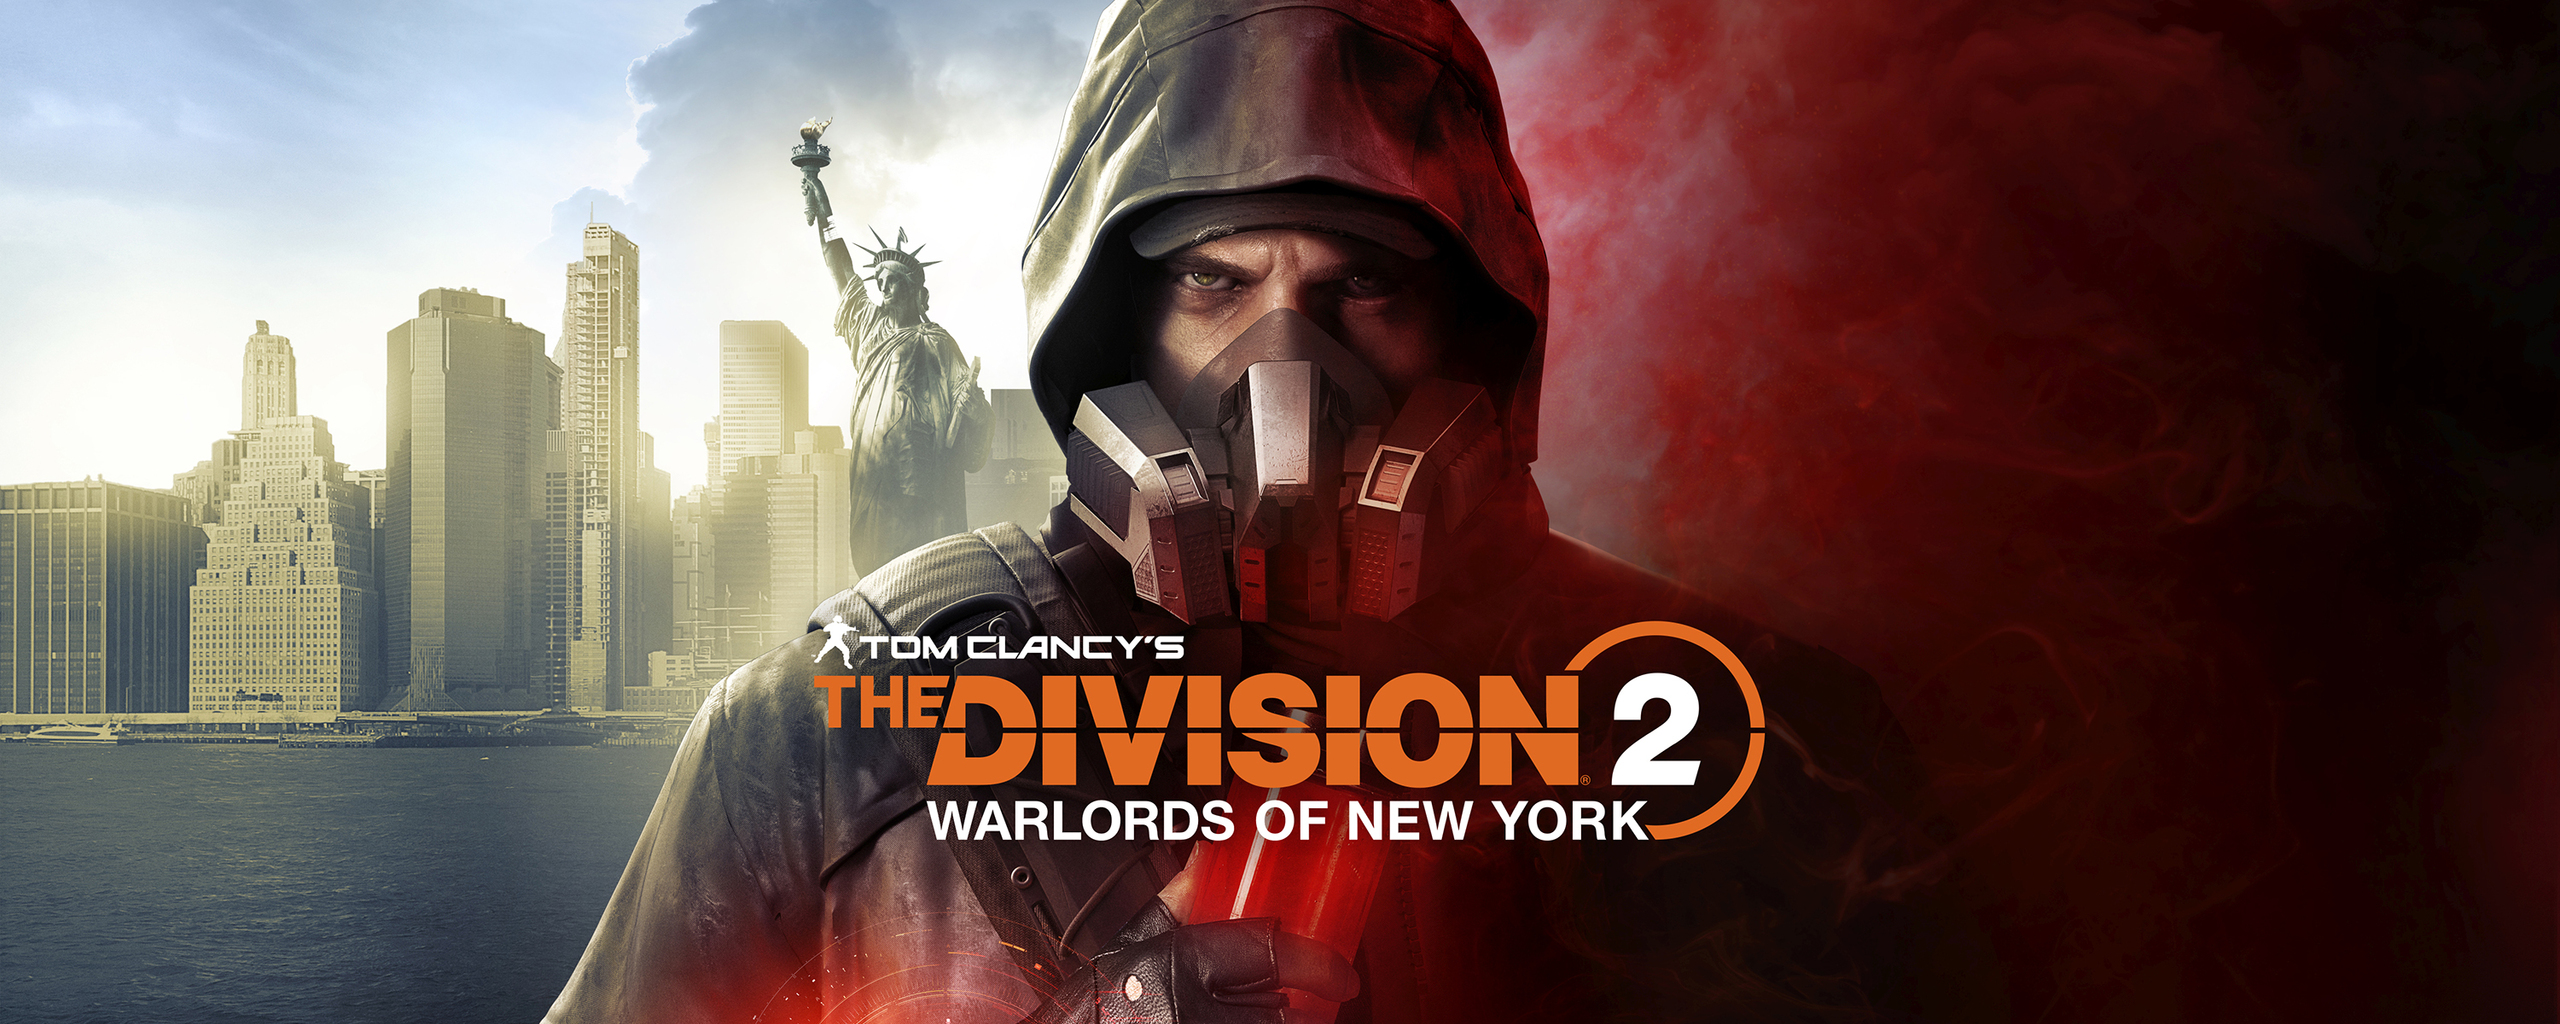 tom-clancys-the-division-2-warlords-of-new-york-v0.jpg